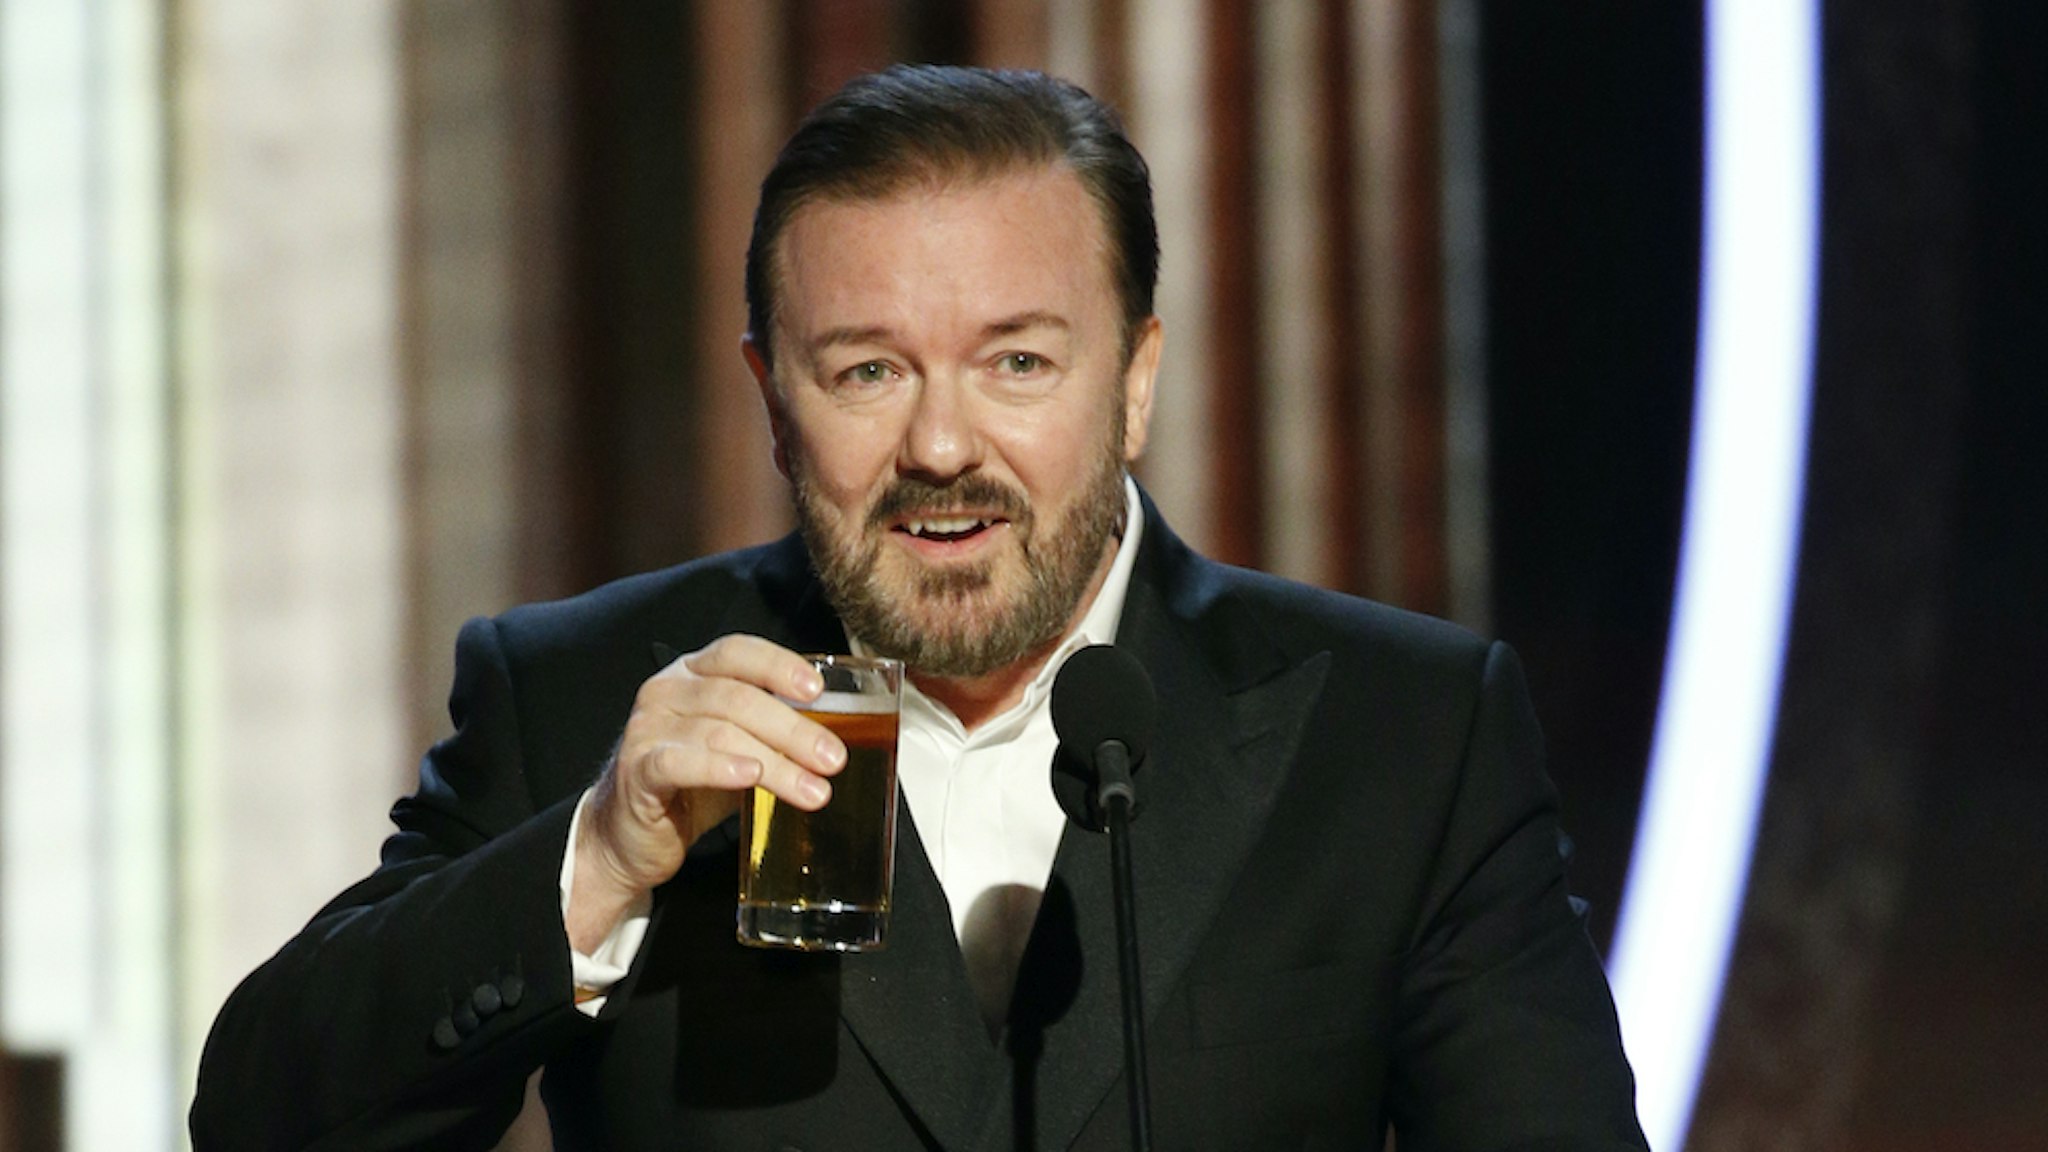 In this handout photo provided by NBCUniversal Media, LLC, host Ricky Gervais speaks onstage during the 77th Annual Golden Globe Awards at The Beverly Hilton Hotel on January 5, 2020 in Beverly Hills, California. (Photo by Paul Drinkwater/NBCUniversal Media, LLC via Getty Images)